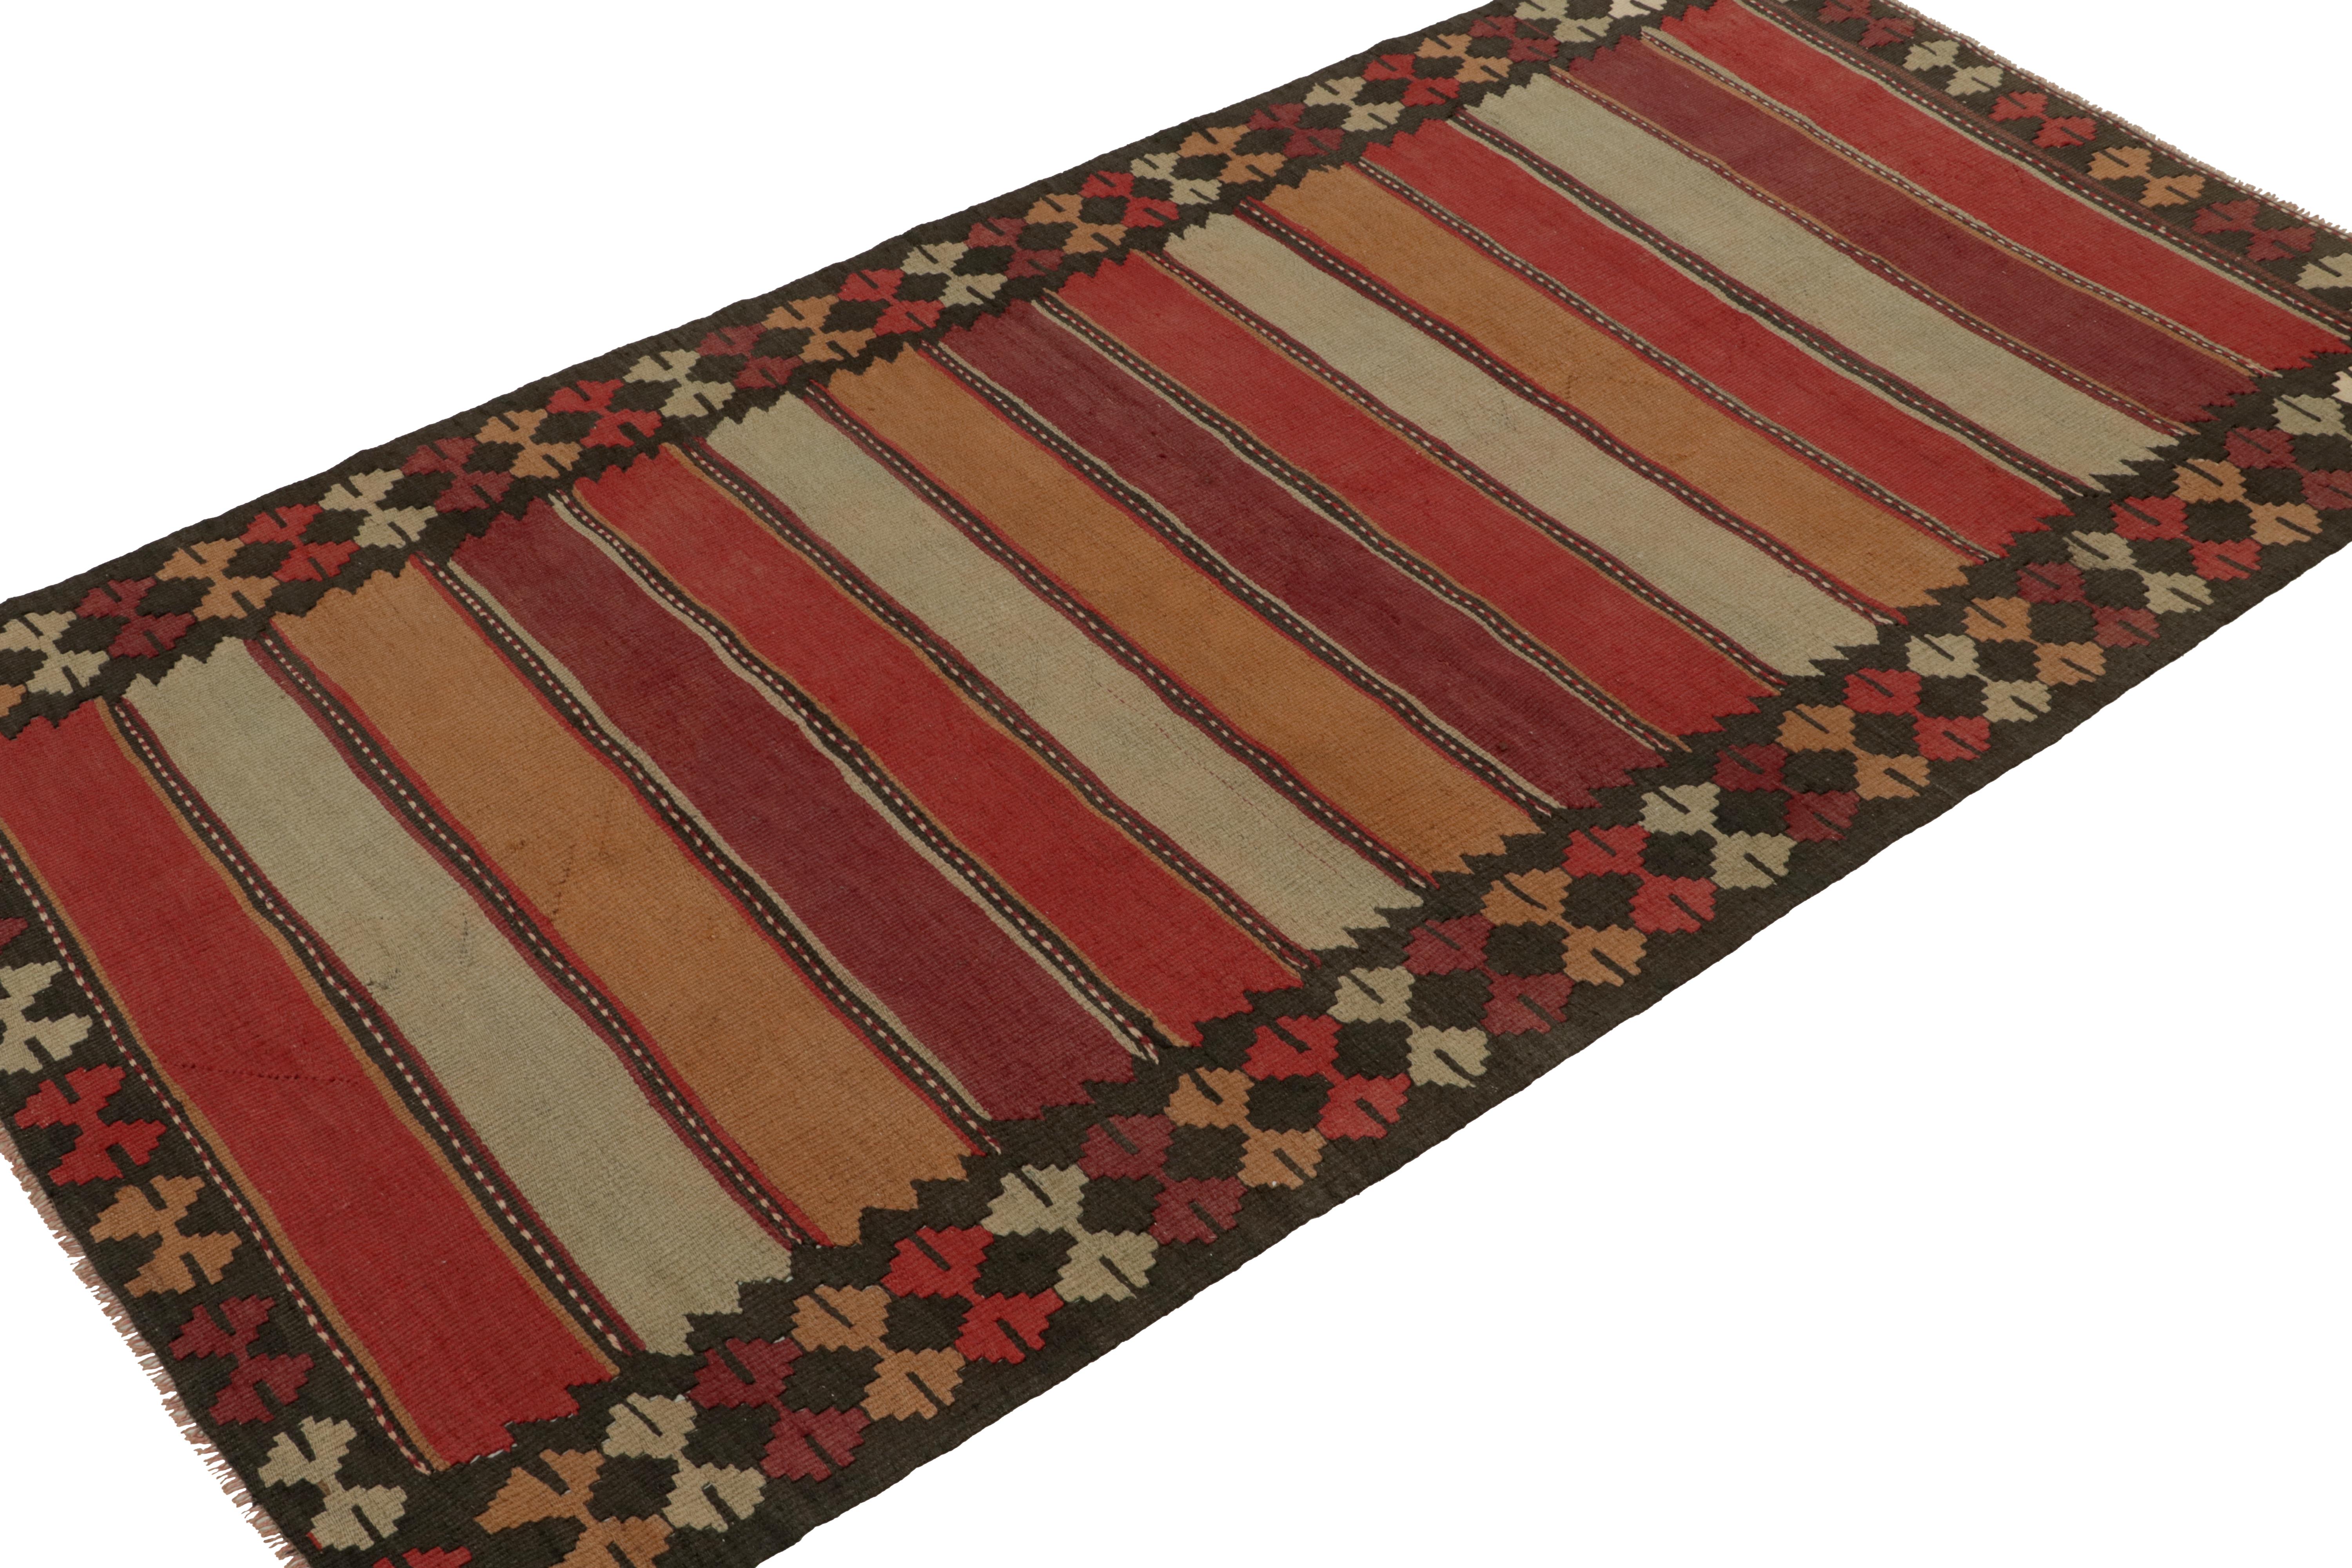 Hand-Knotted Vintage Persian Tribal Kilim with Stripes and Geometric Patterns by Rug & Kilim For Sale